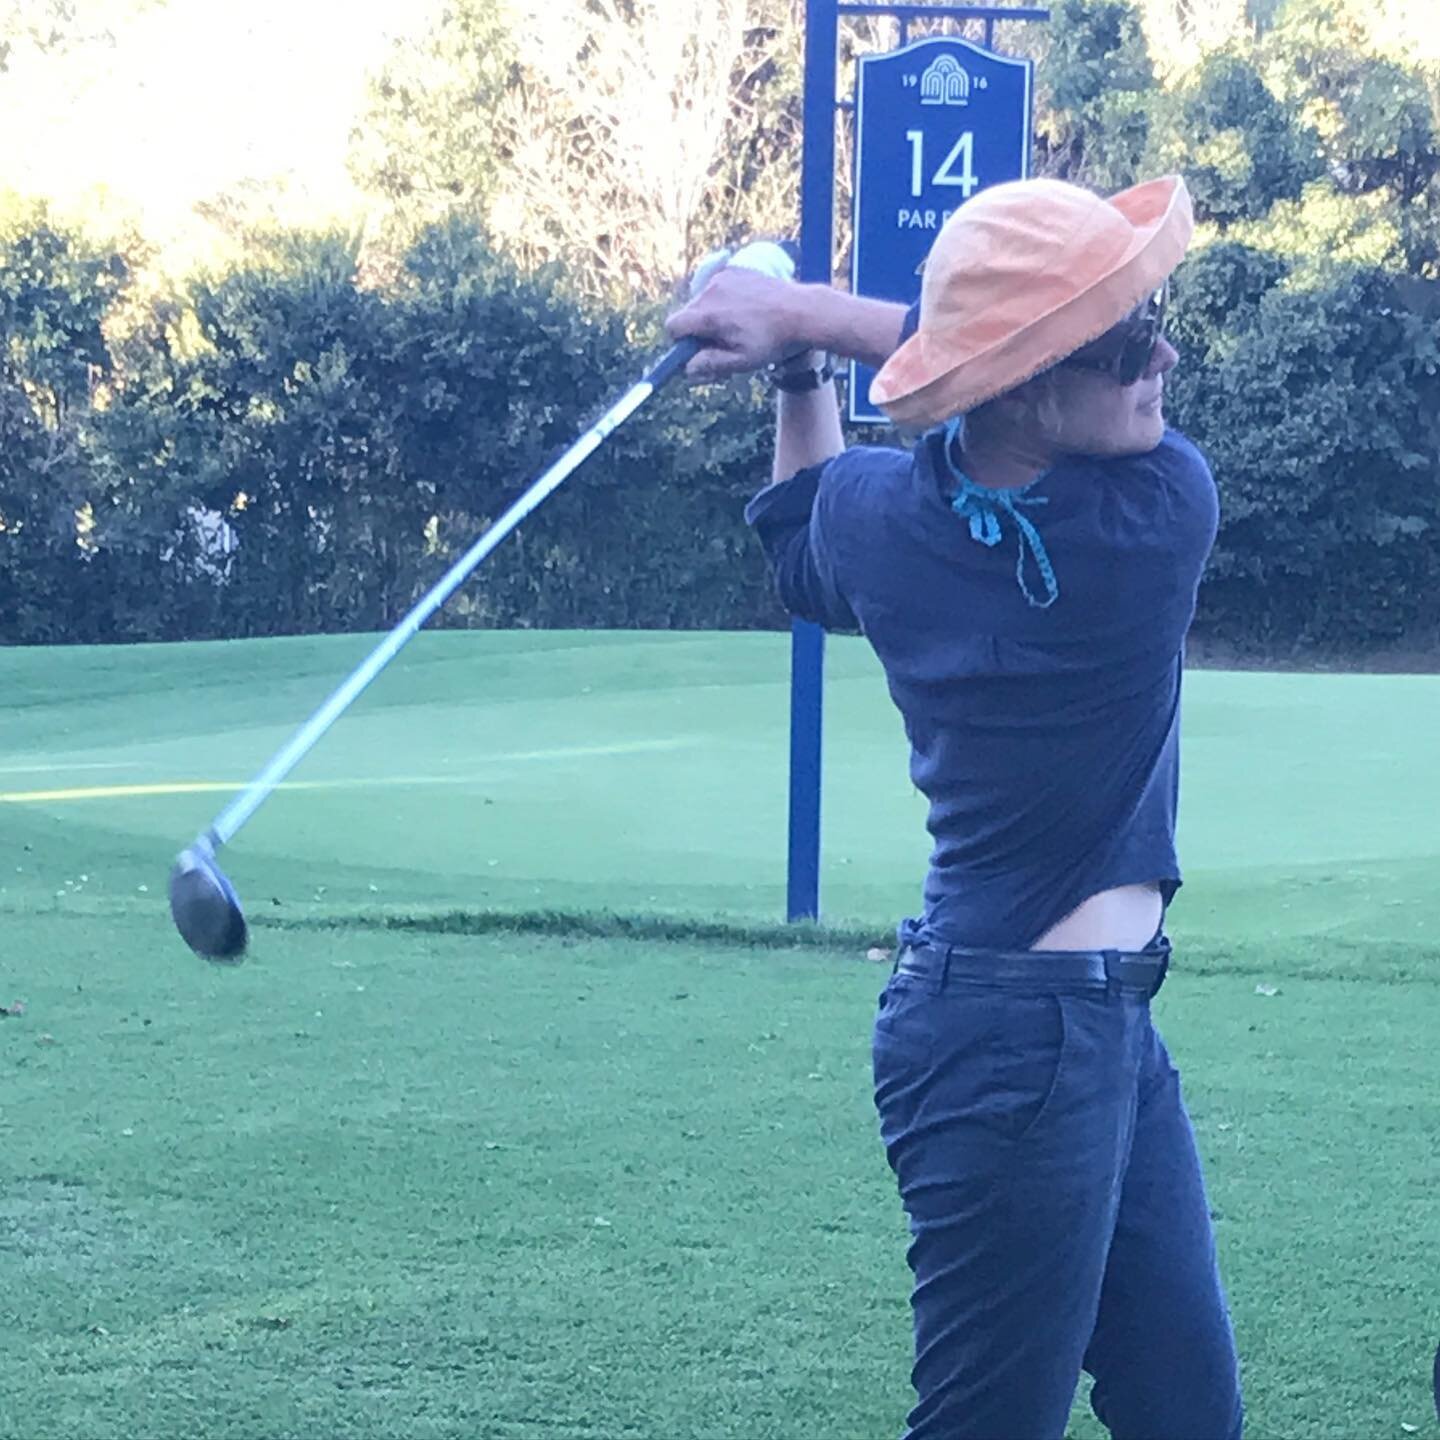 I&rsquo;m sure there are a few things wrong with this swing, but I connected with the ball with an extremely satisfying &ldquo;thoc&rdquo; sound. Looking at trees from a different point of view, this week. (And listening to golf balls being hit!)
.
.